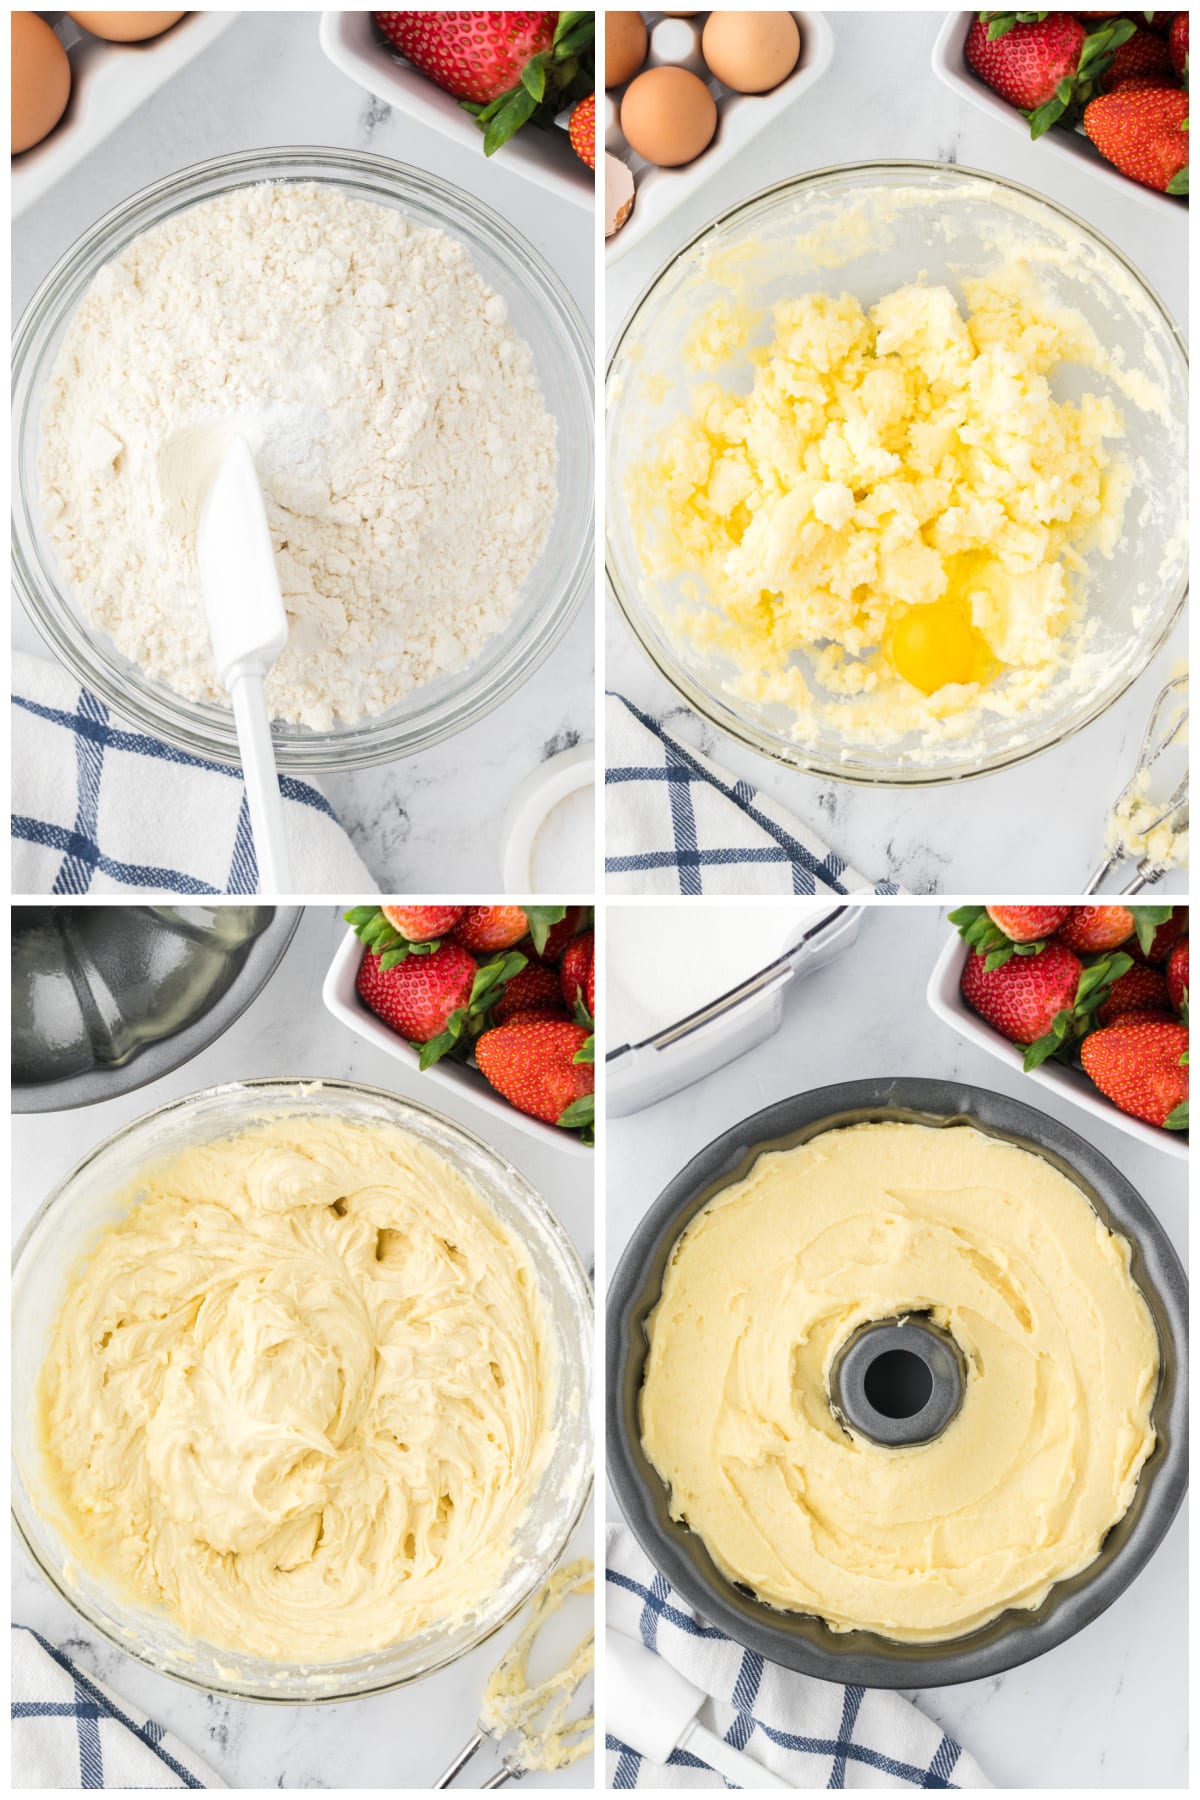 A collage of four images showing how to make and bake the bundt cake.